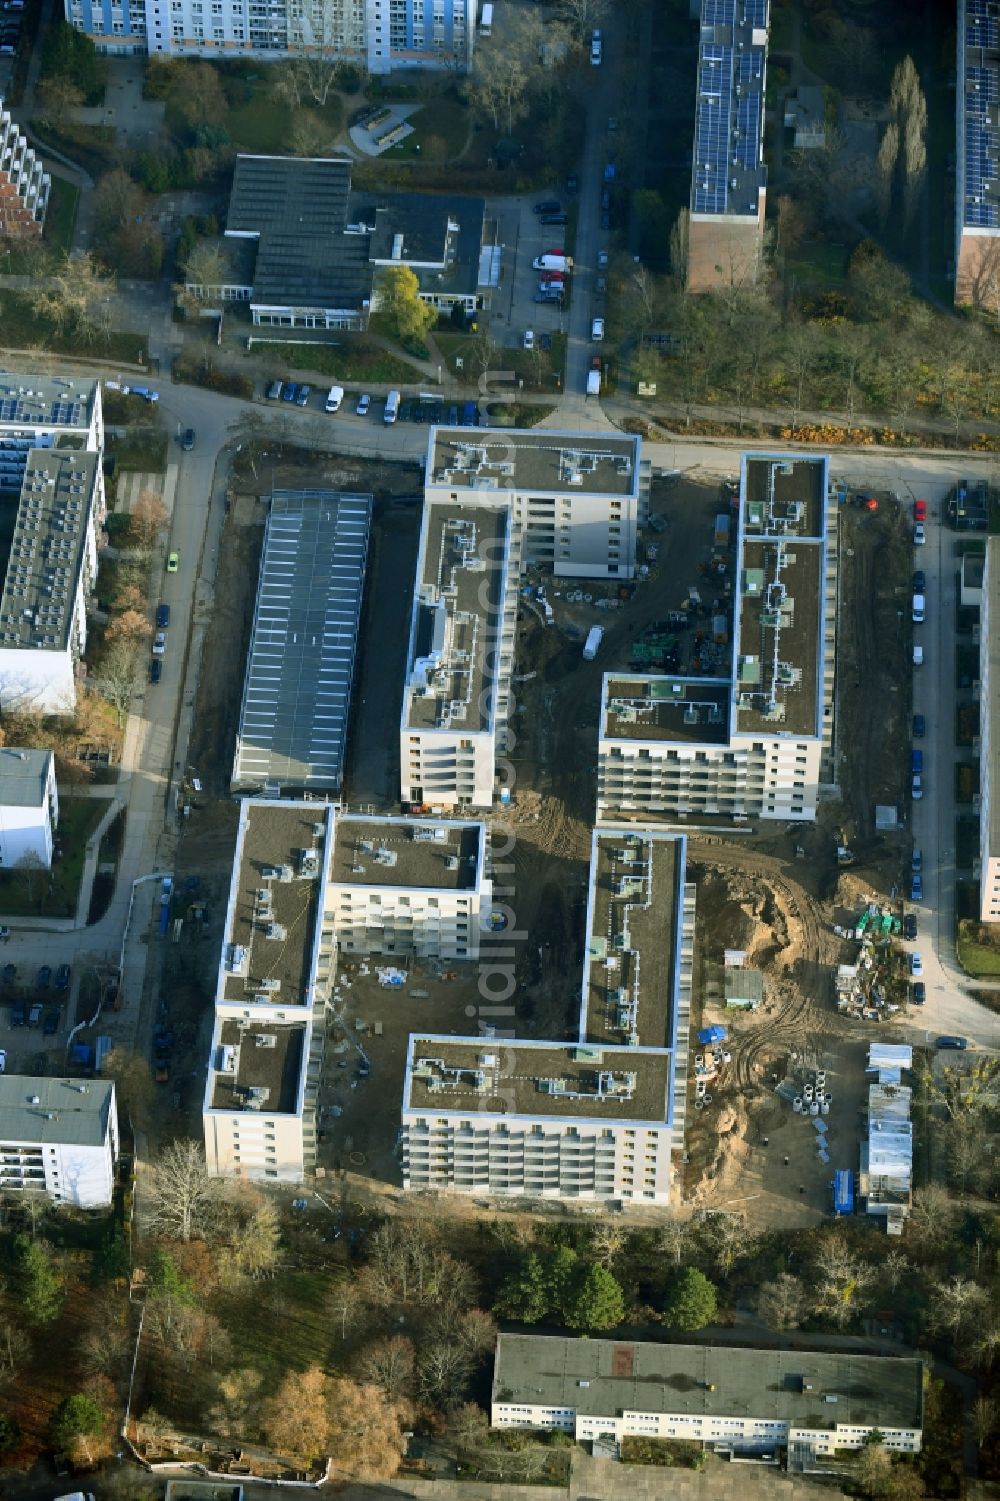 Berlin from above - Construction site to build a new multi-family residential complex Lion-Feuchtwanger-Strasse - Gadebuscher Strasse in the district Hellersdorf in Berlin, Germany